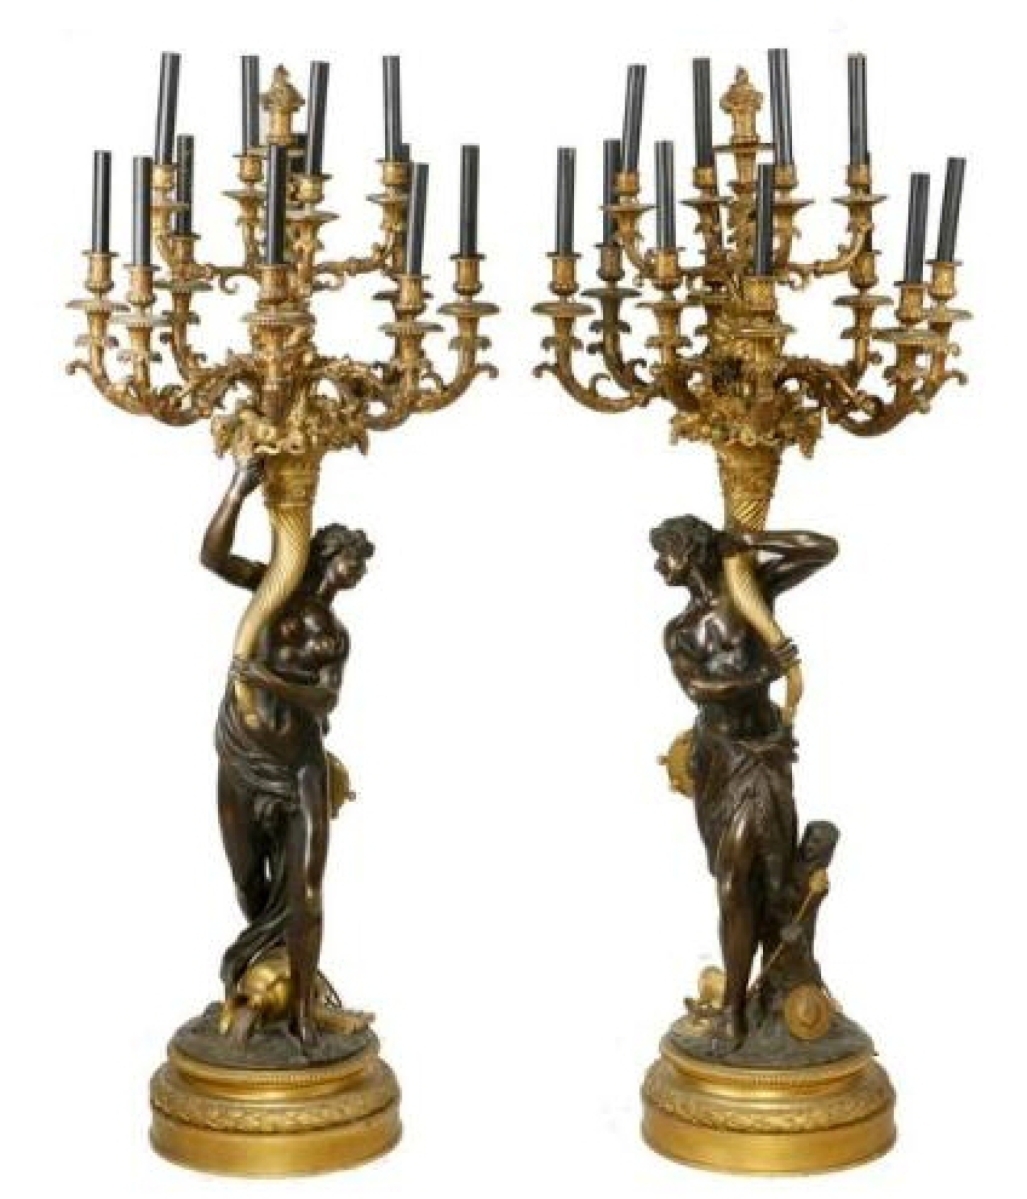 One of the higher priced items in the sale, this pair of French gilded and patinated bronze 12-arm figural candelabra, 55 inches tall, earned $24,750.